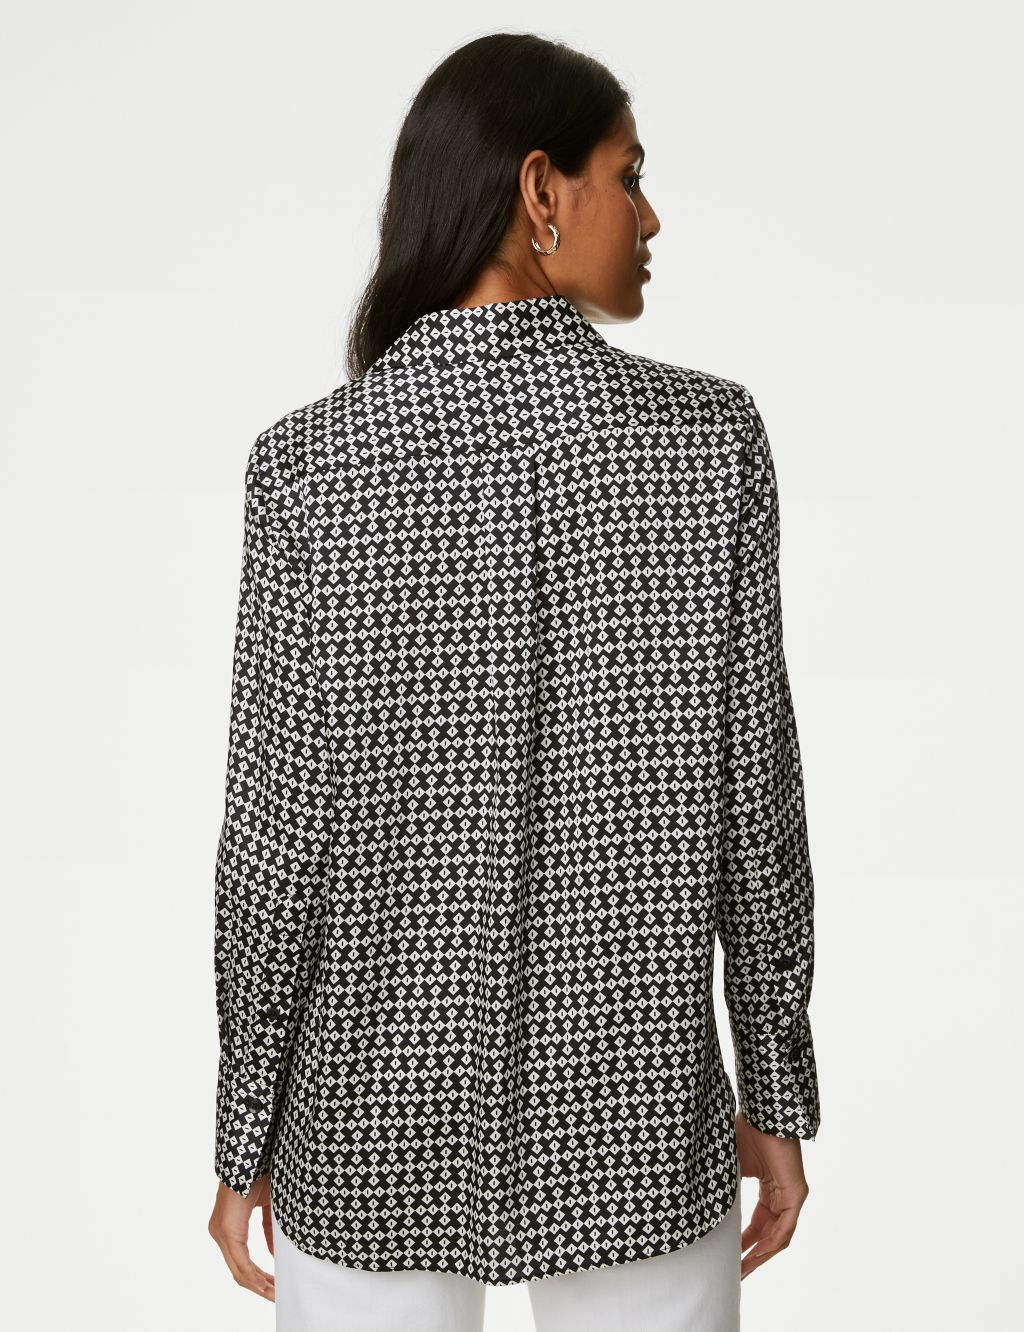 Printed Collared Popover Blouse image 5